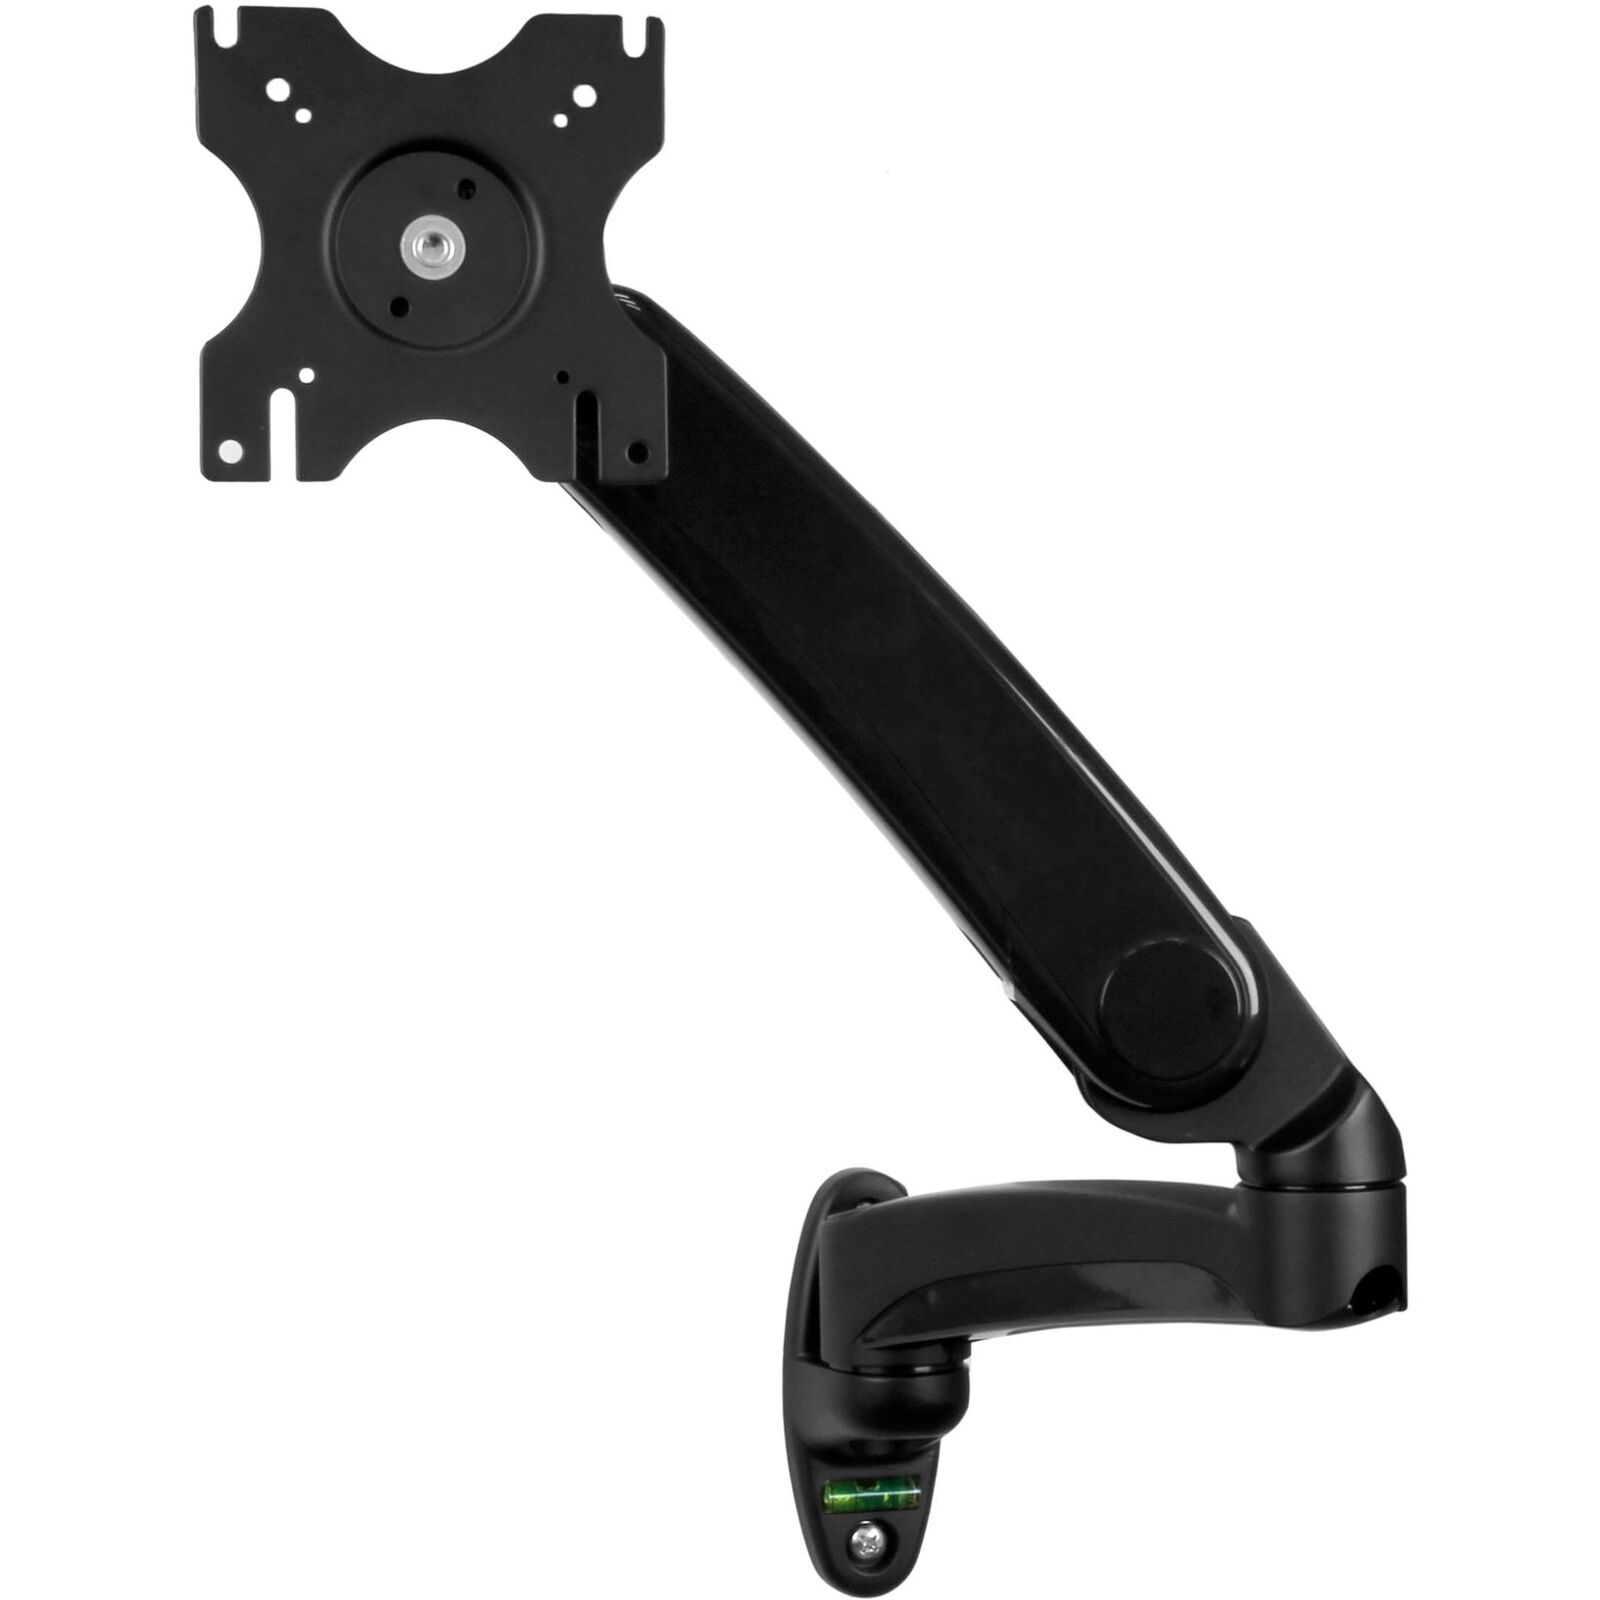 StarTech.com Wall Mount Monitor Arm - Full Motion Articulating - Adjustable -...